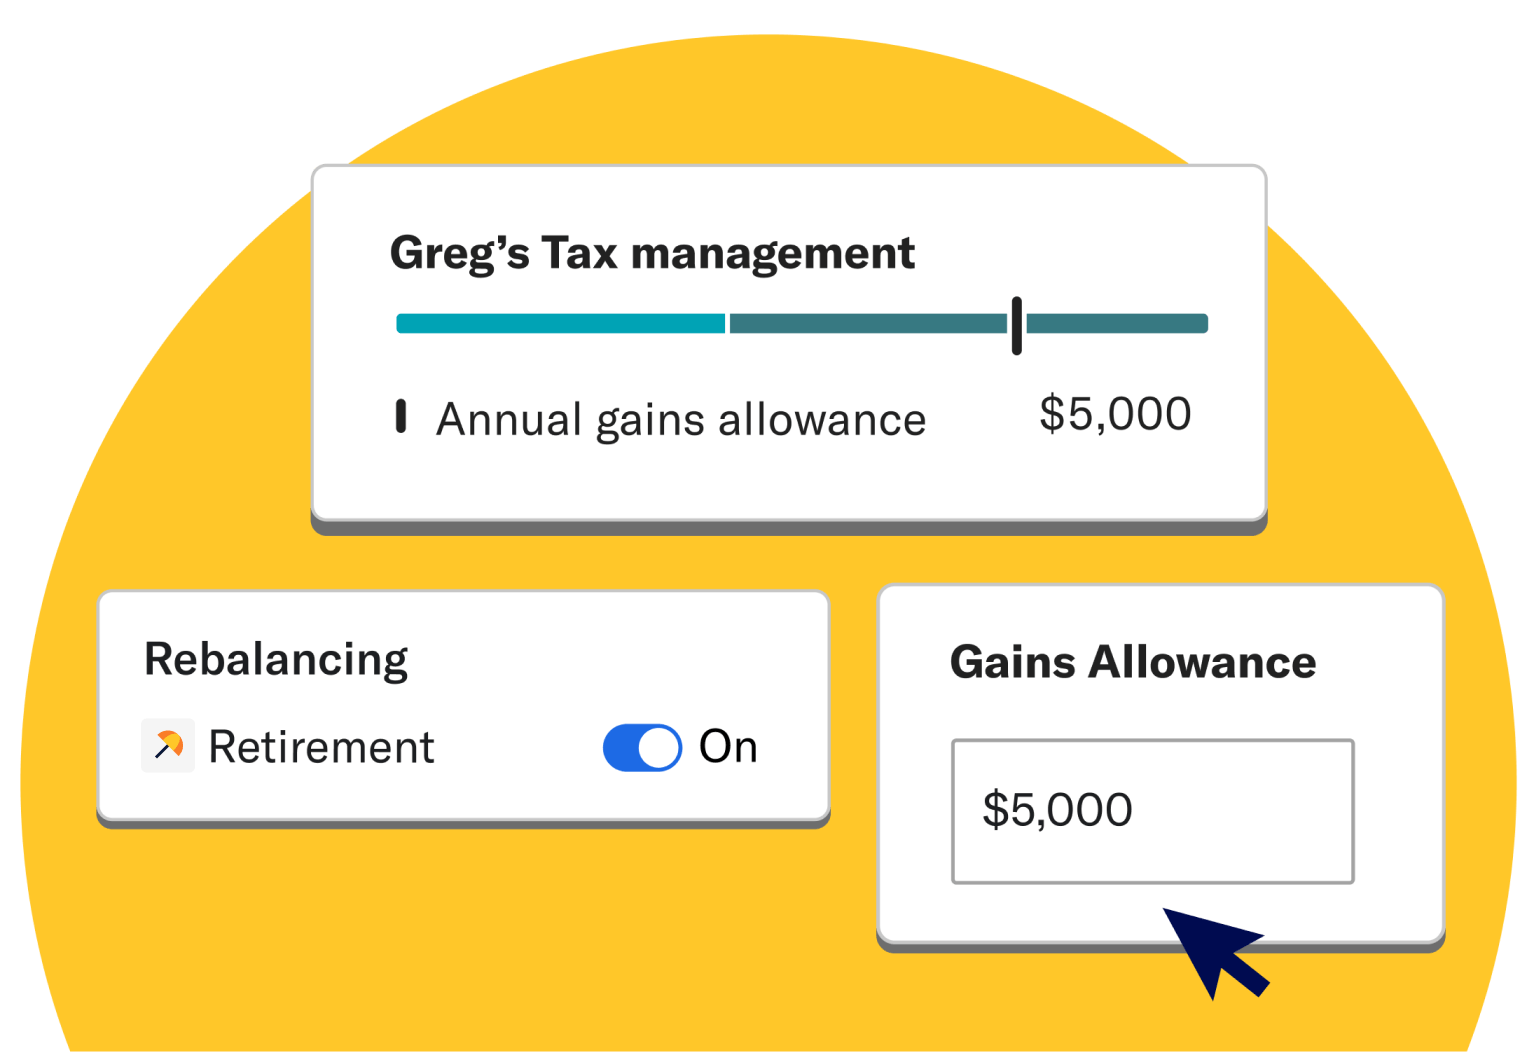 Client's investment account cards showing Greg's tax management with $5,000 annual gains allowance and rebalancing turned on for retirement account.